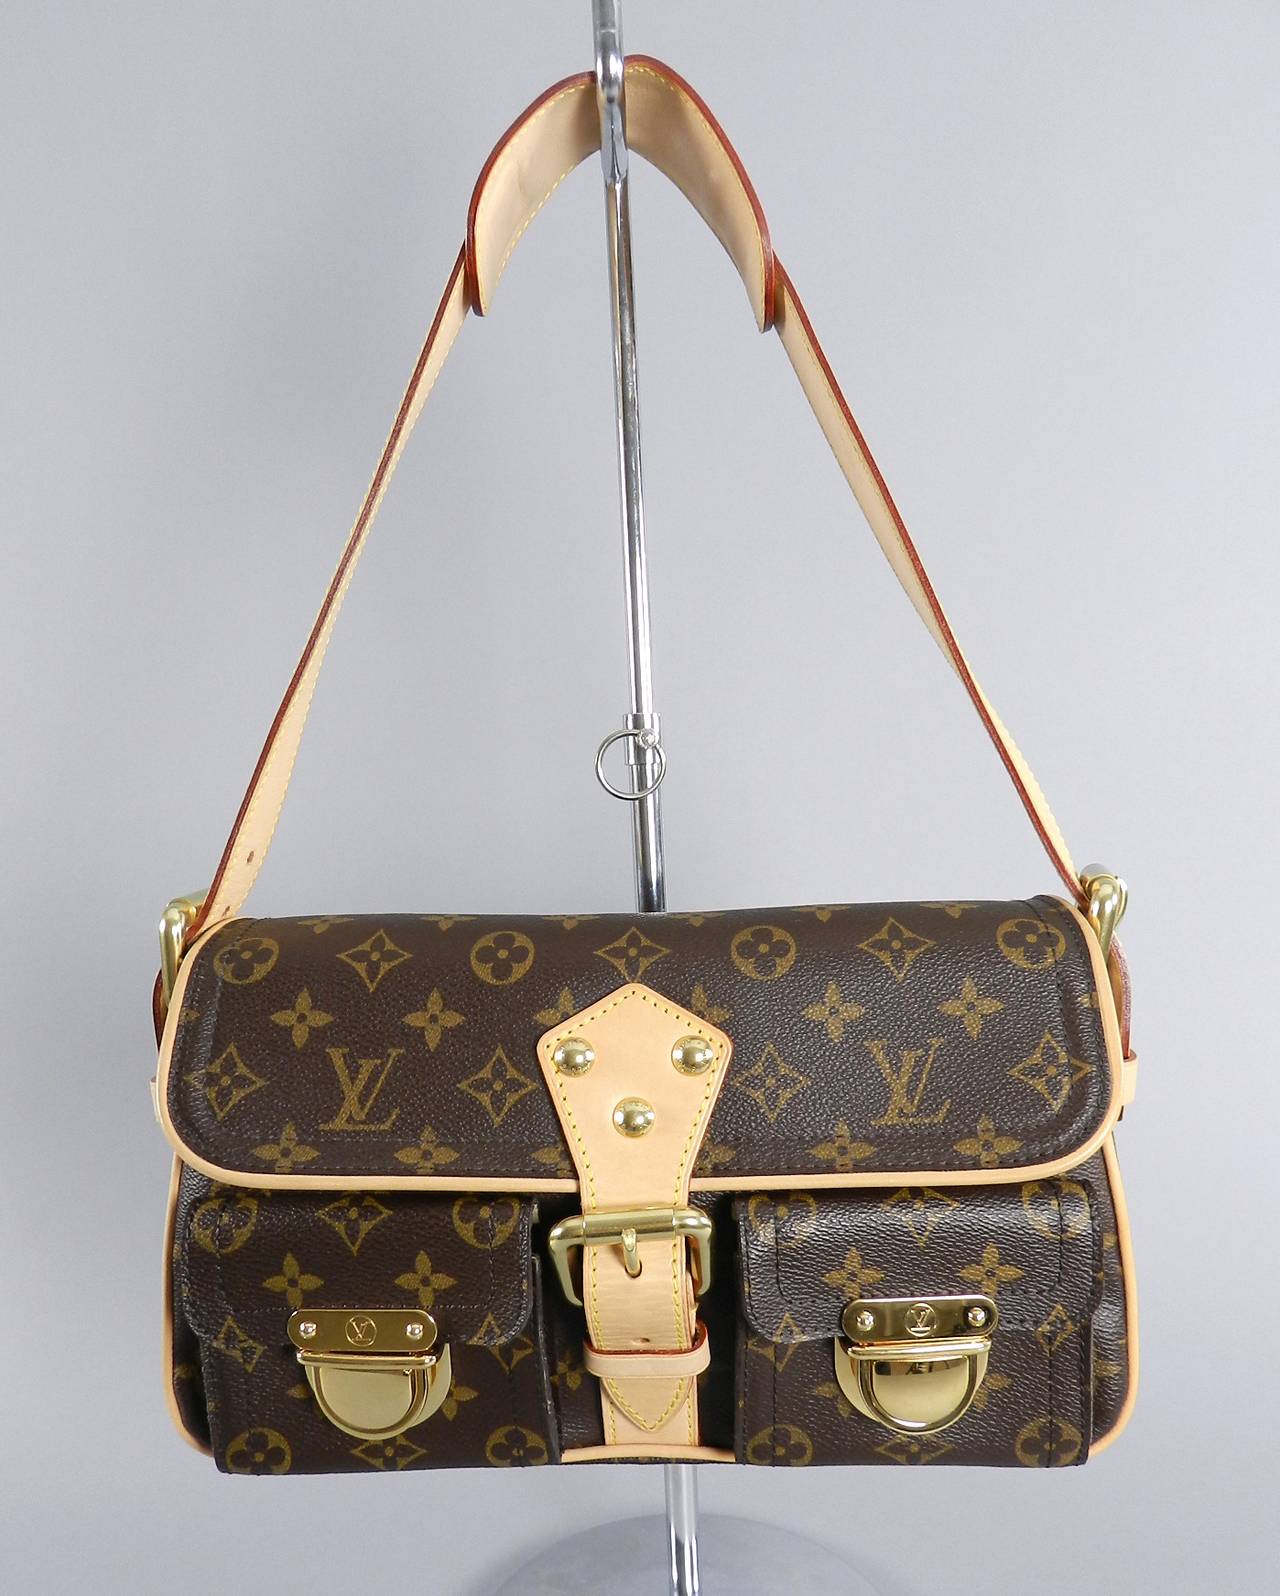 Louis Vuitton Hudson monogram shoulder bag. Previously owned but used only a few times. Excellent condition, original duster and paper card. Body of bag measures 12 x 6.75 x 4